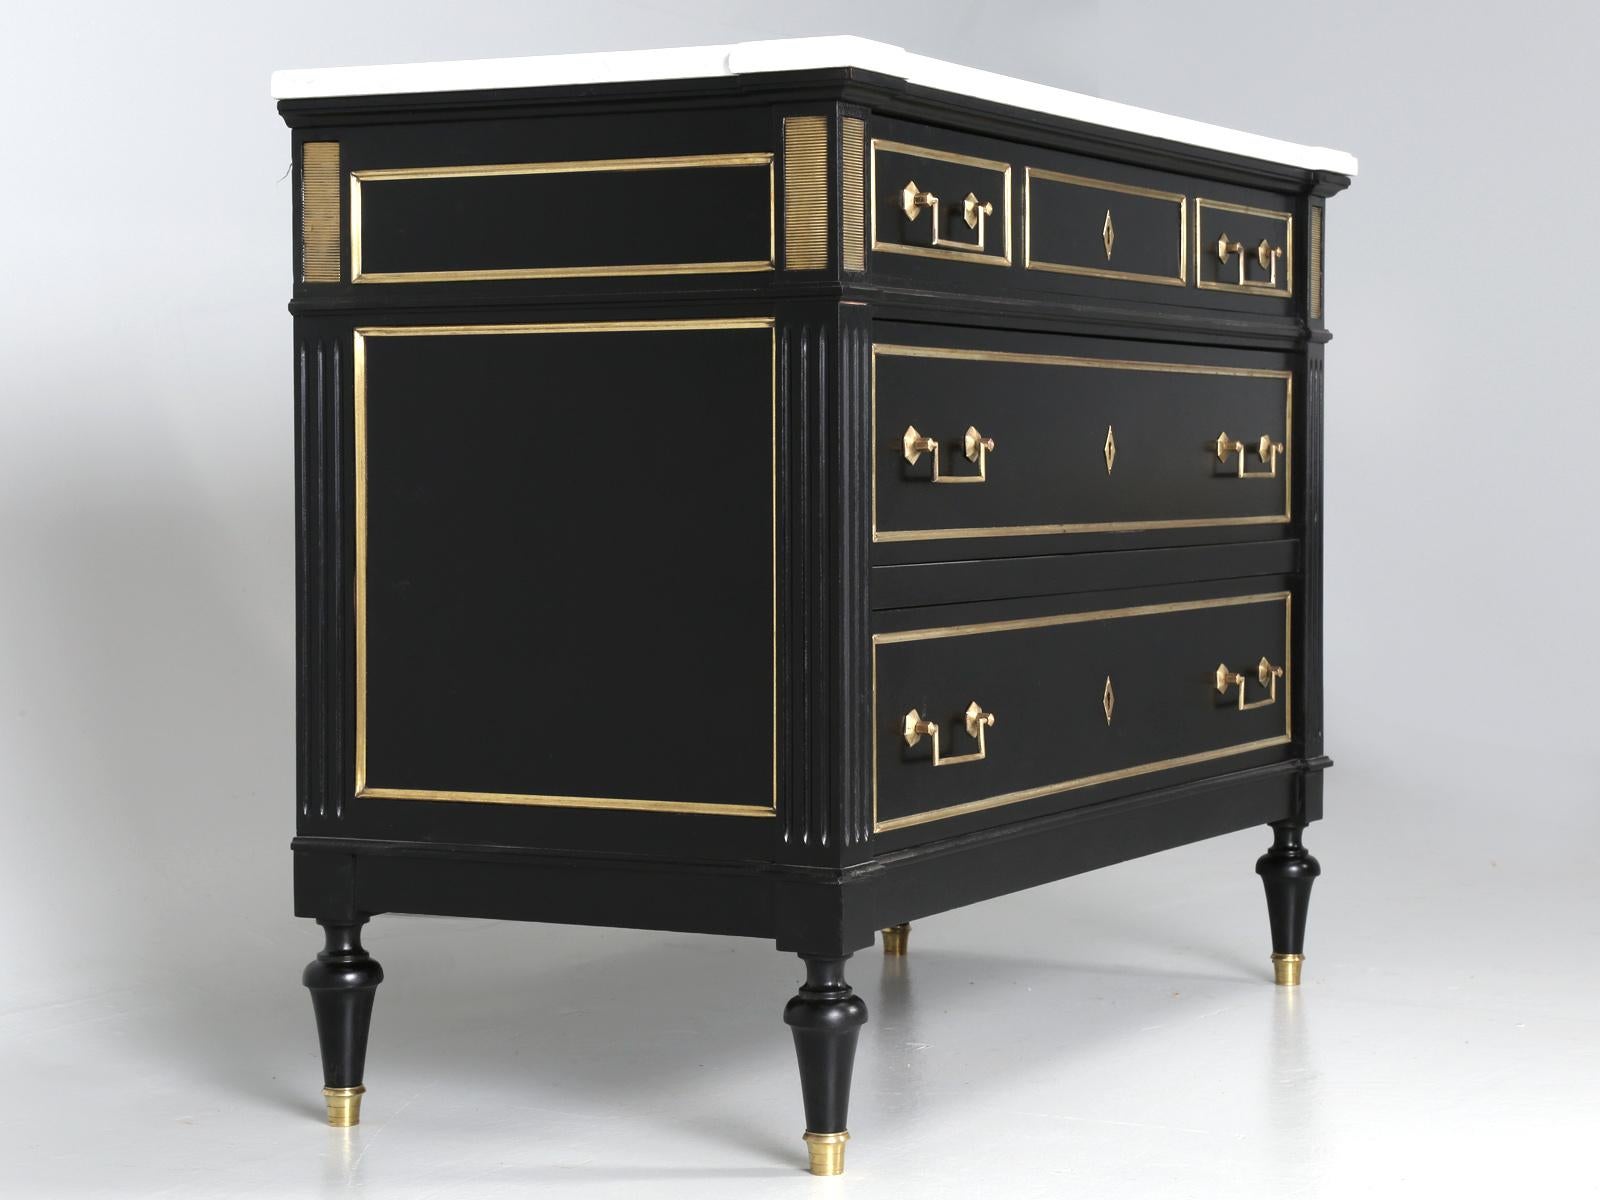 Antique French Louis XVI commode, or if prefer, dresser or even chest of drawers if you are English. Our Old Plank workshop, completely stripped this antique French commode down to the bare wood and slowly applied a proper ebonized black finish. The